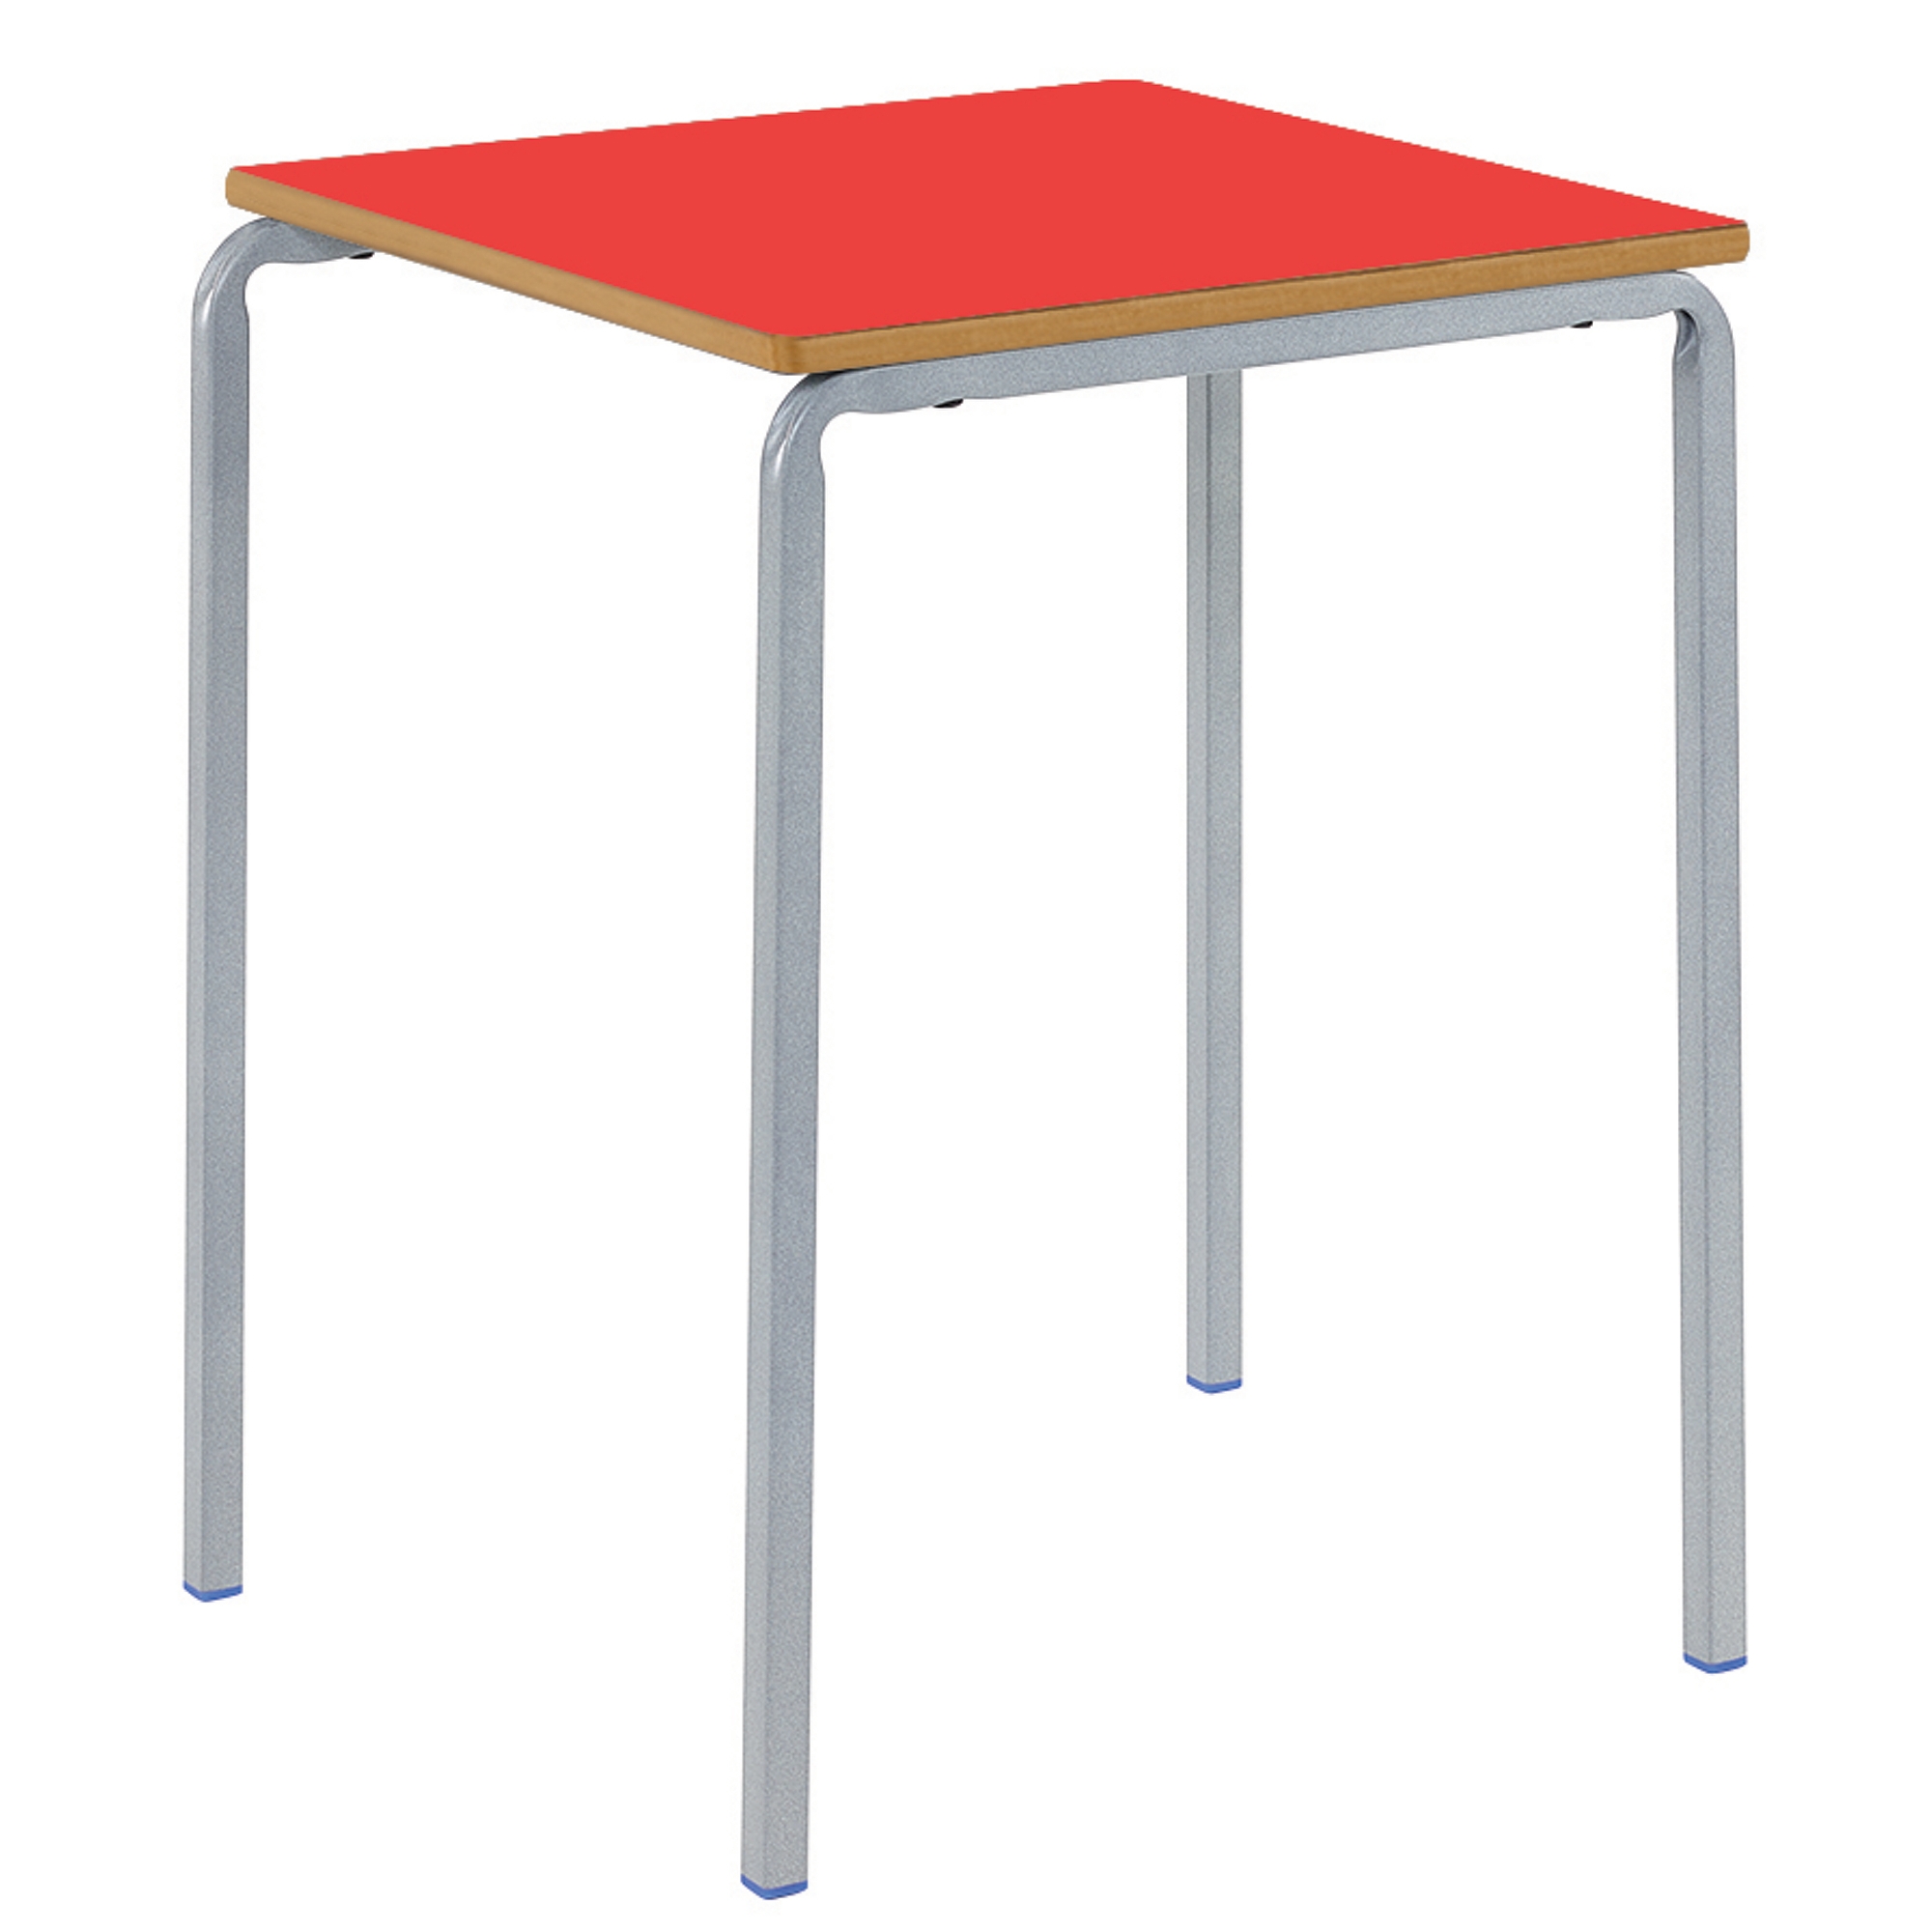 Classmates Square Crushed Bent Classroom Table - 600 x 600 x 710mm - Red